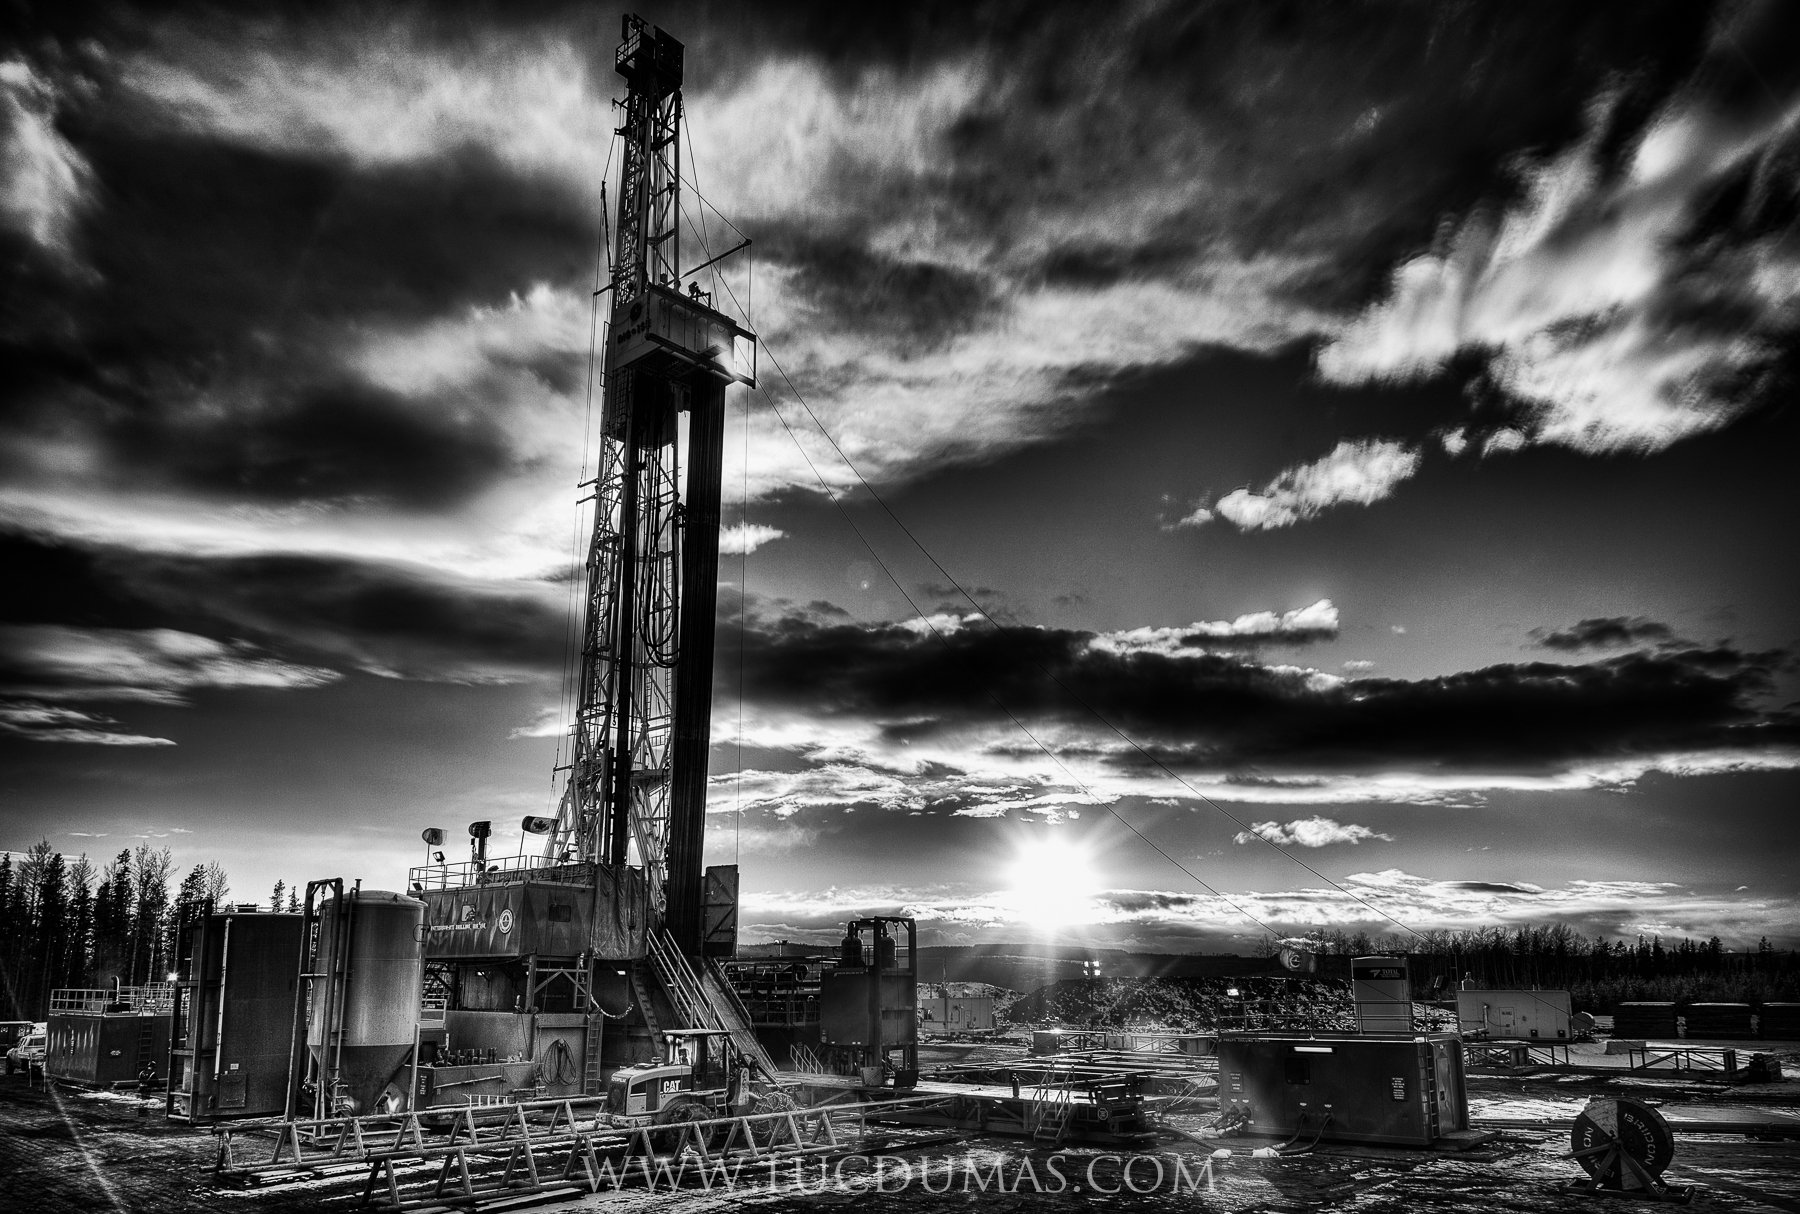 Mcvay Rig 8 Jal New Mexico  Cool wallpapers for phones Beautiful sky  Petroleum engineering